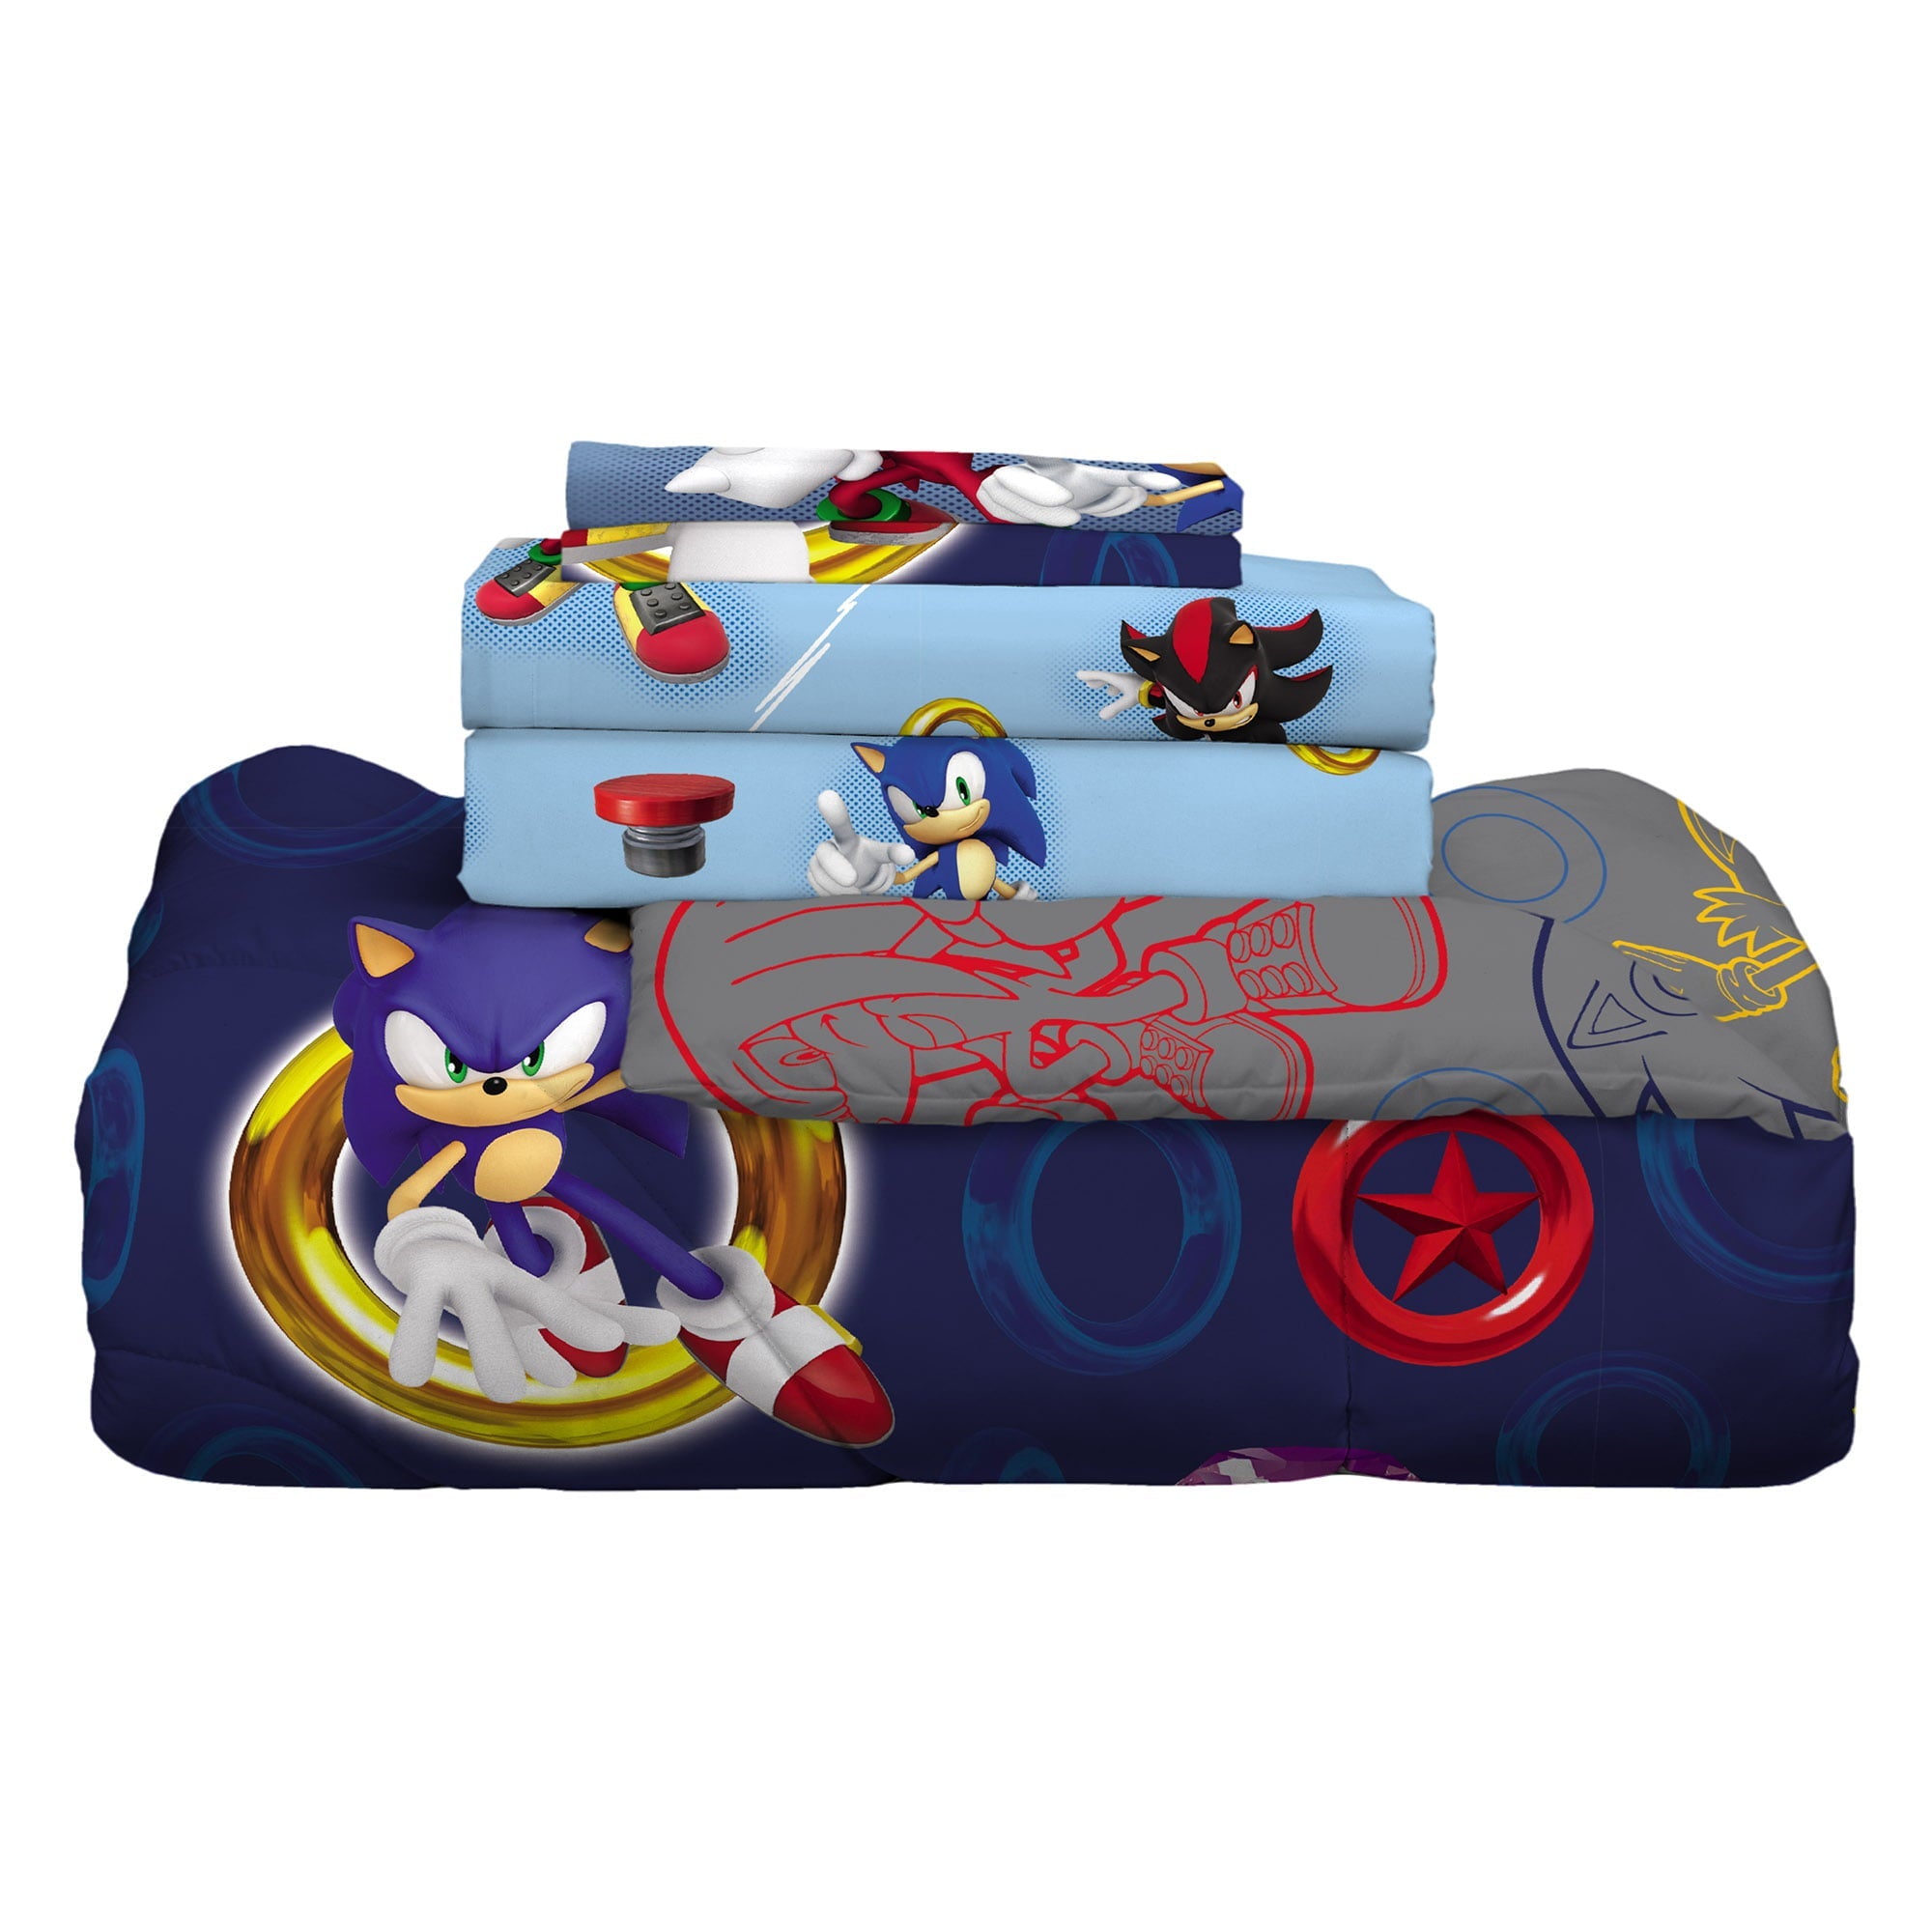 Sonic the Hedgehog Kids Twin Bed in a Bag, Gaming Bedding, Comforter Sheets and Sham, Blue